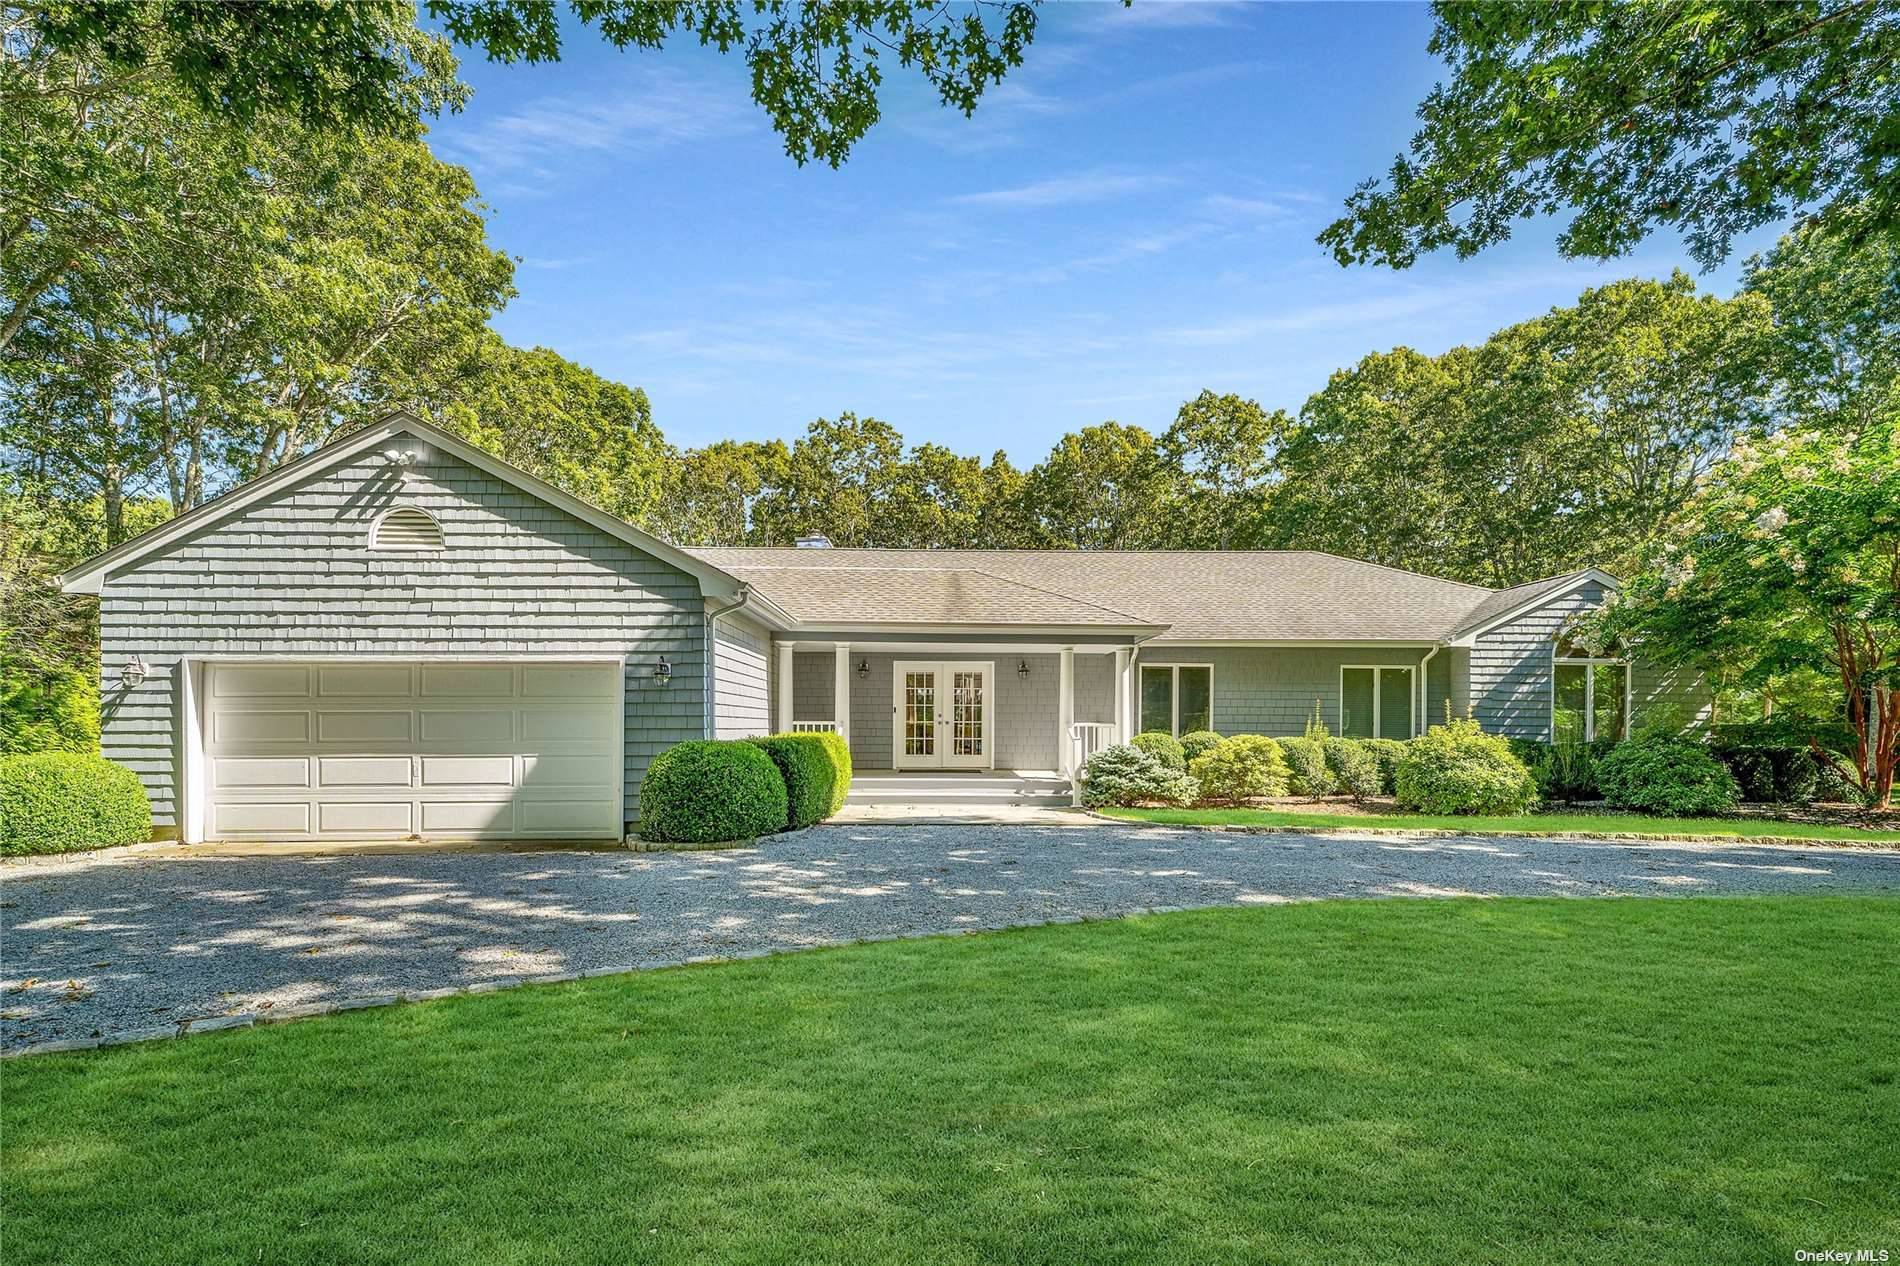 Pull up to a charming four bedroom house in Quogue.